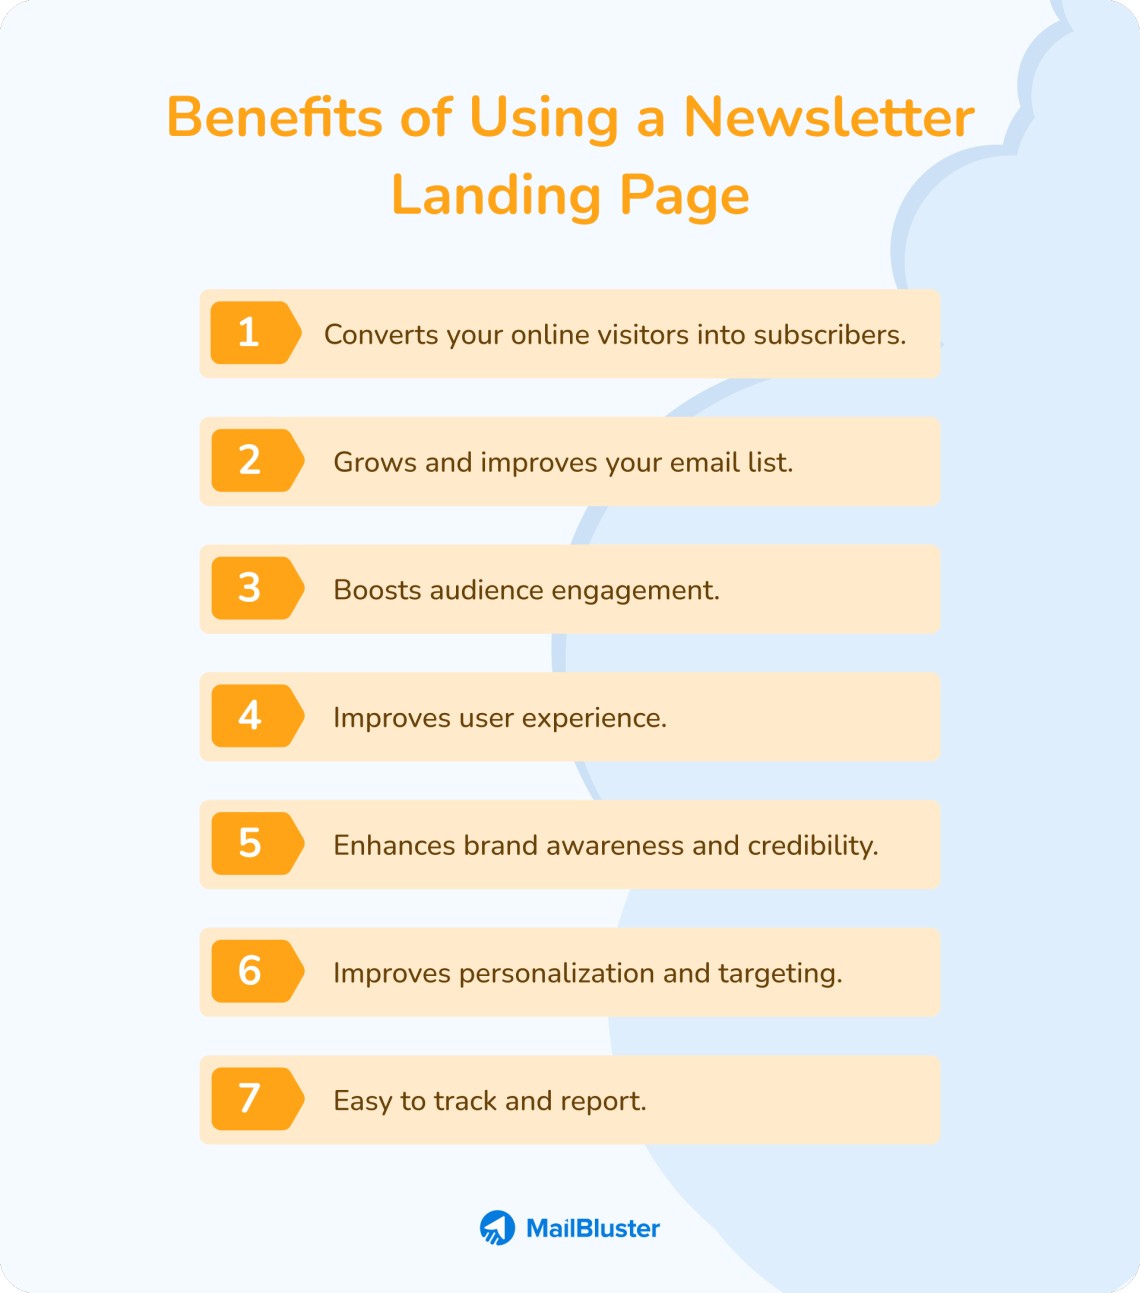 Benefits of Using a Newsletter Landing Page.